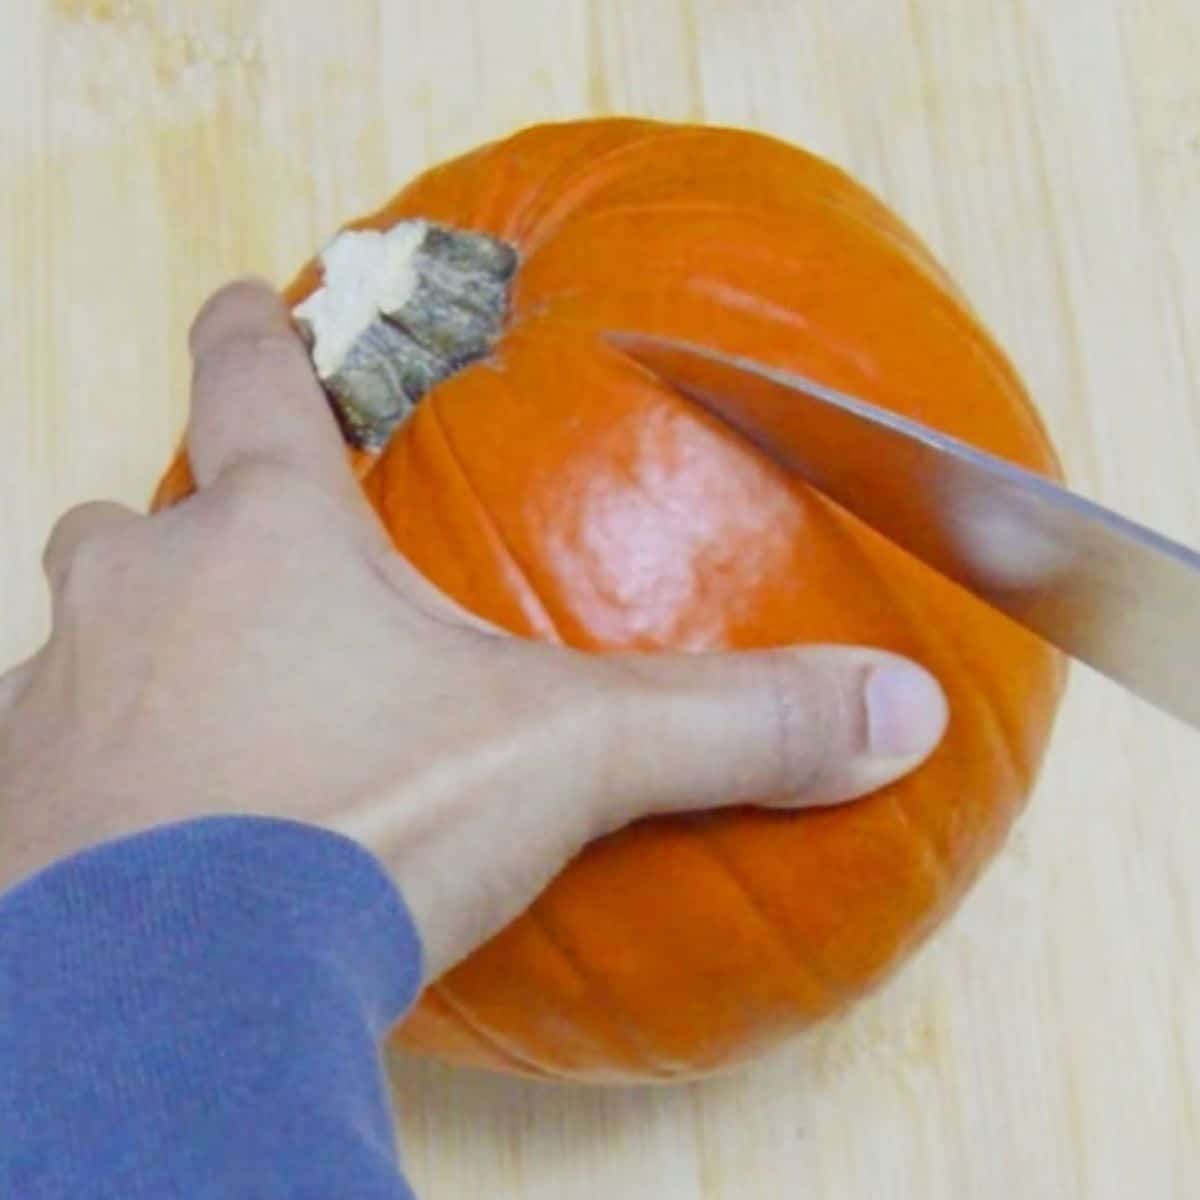 piercing pumpkin with a knife on a wooden boars.